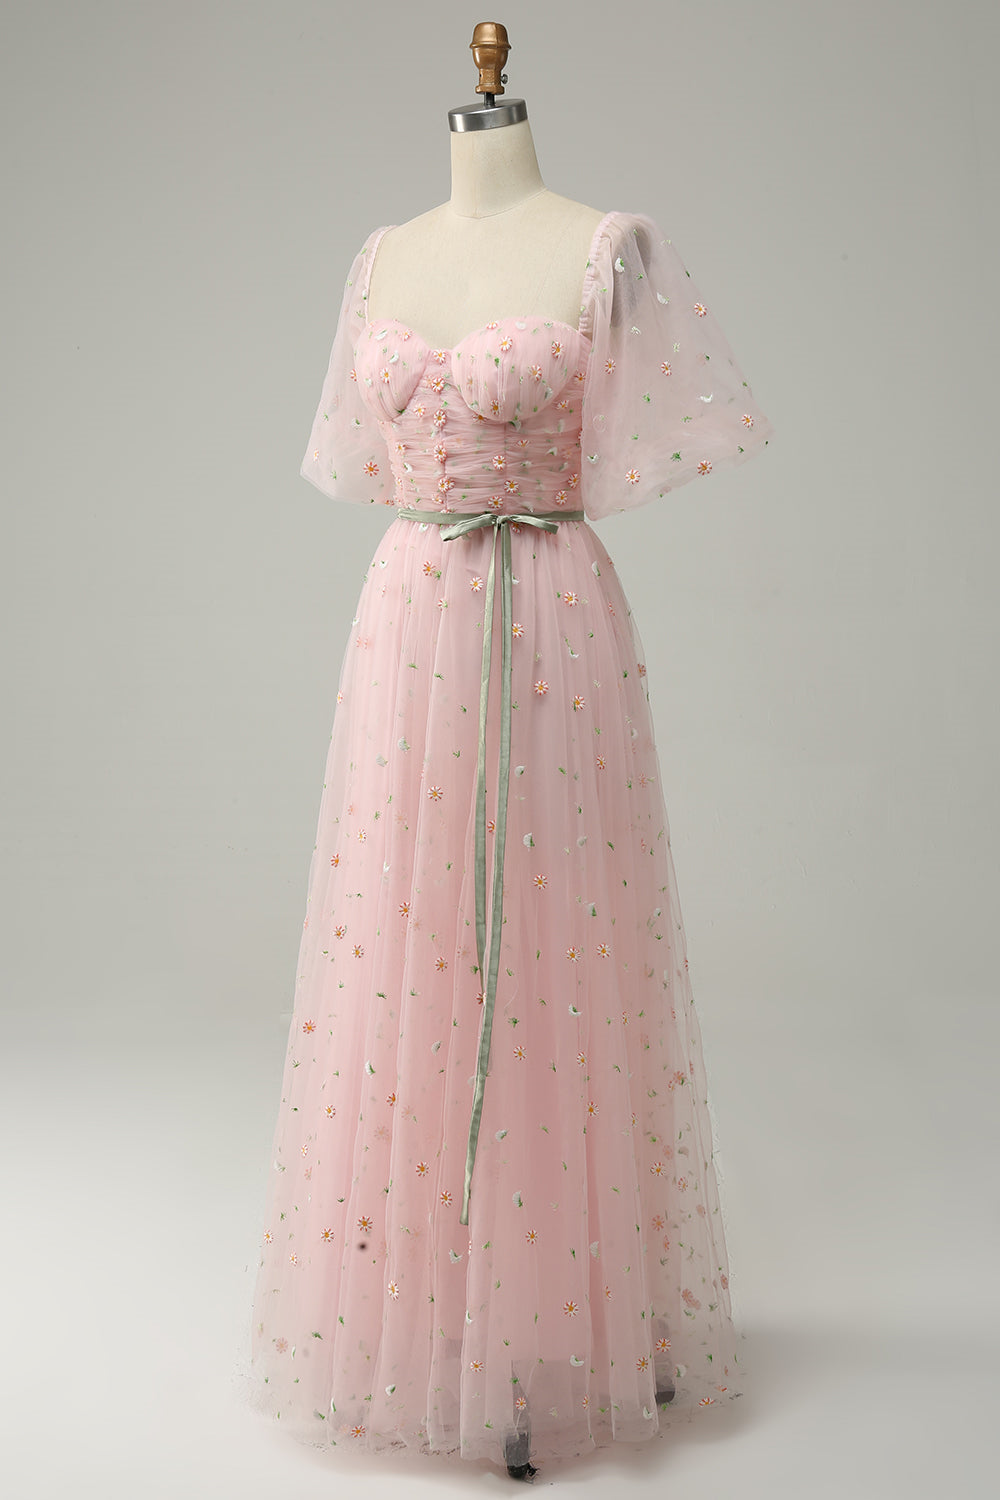 Pink Illusion Puff Sleeves Embroideries A-line Long Prom Dress with Sash